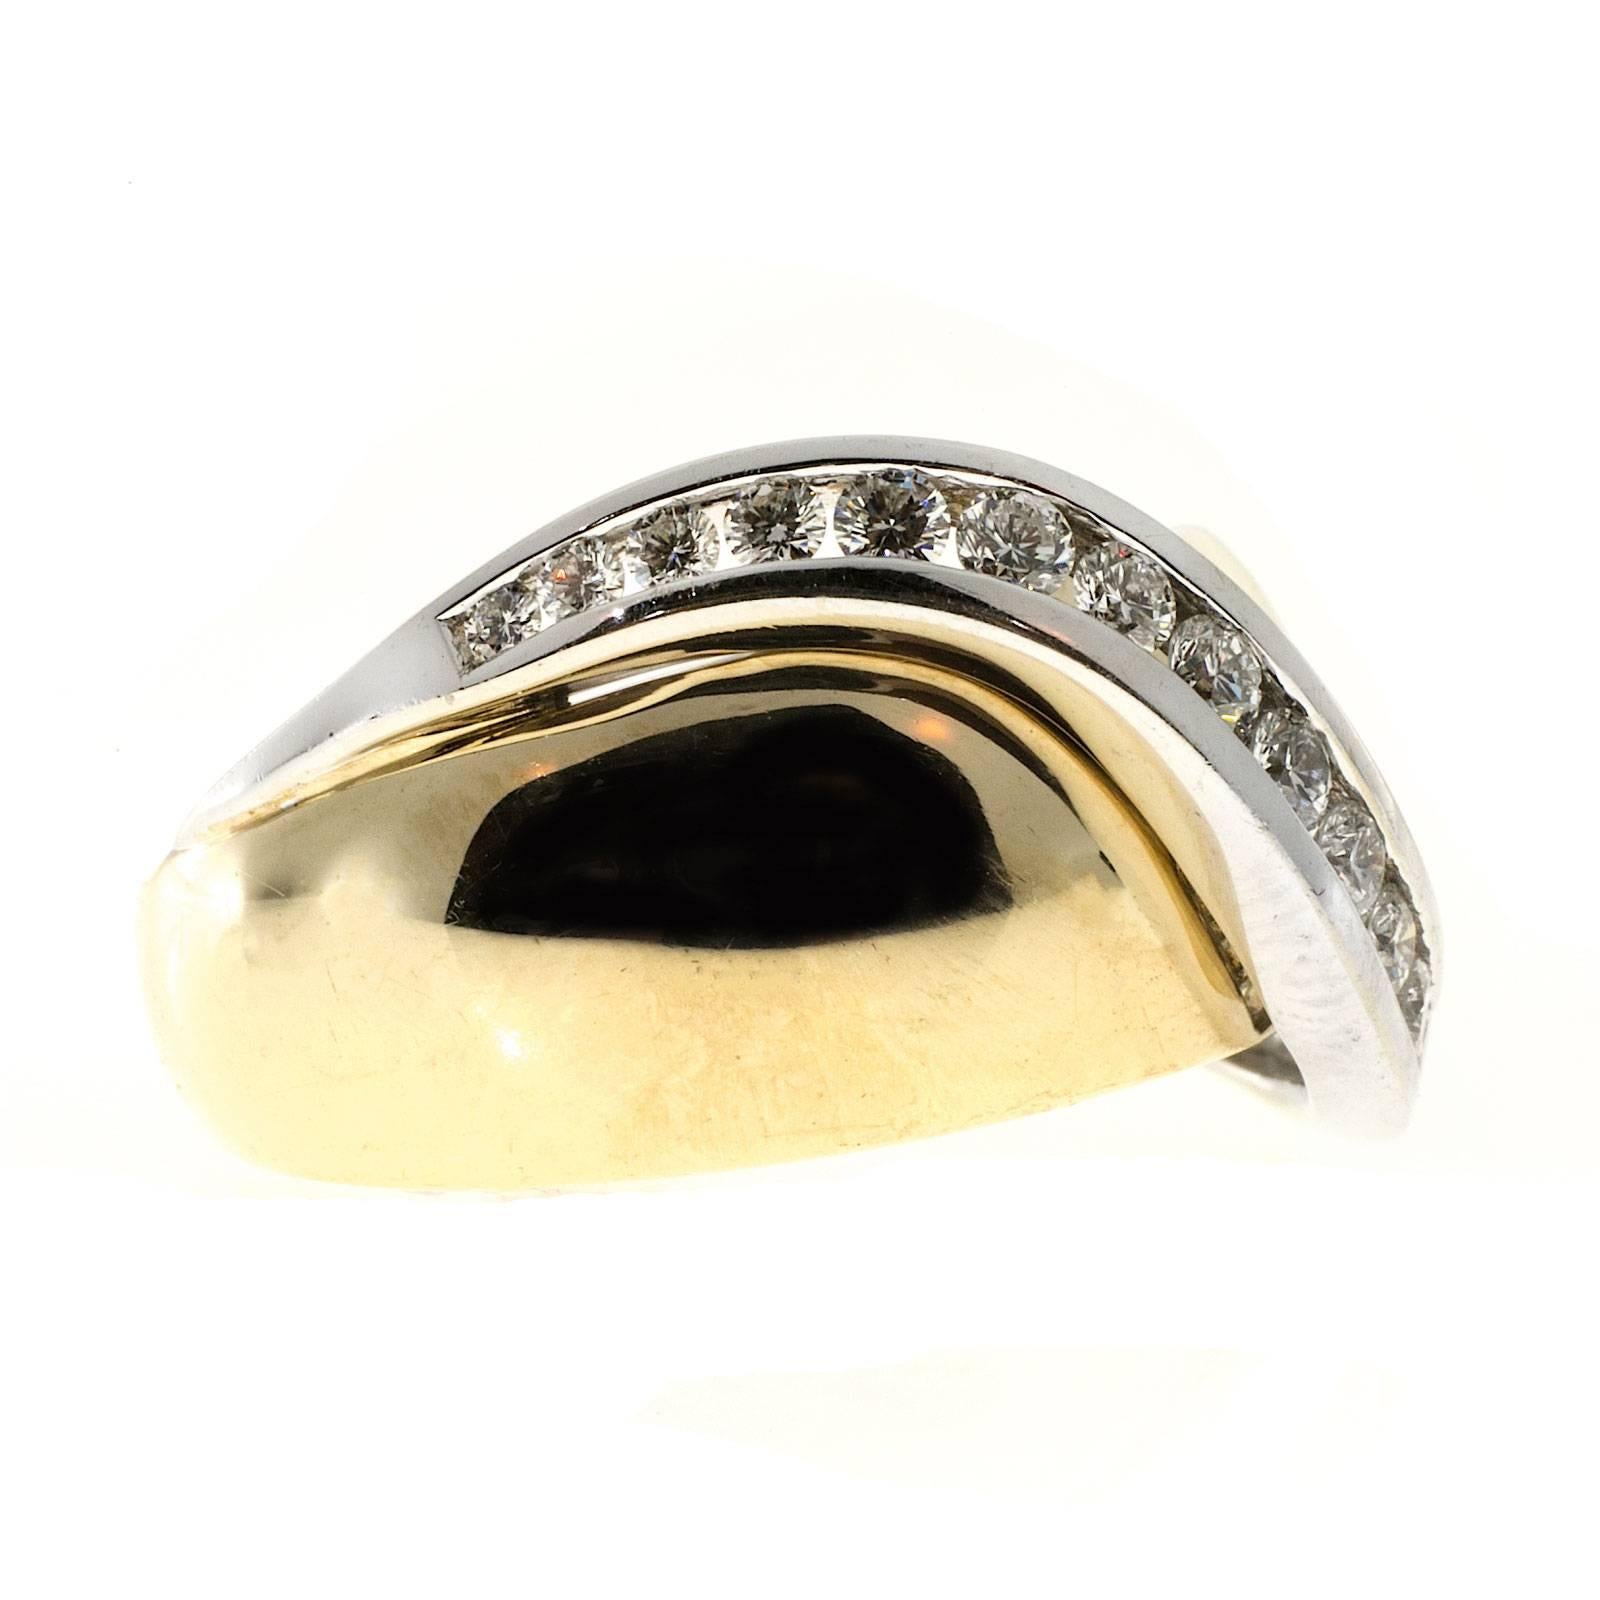 Solid 14k yellow gold tapered band with white gold channel set swirl of full cut diamonds. From the designer JME.

17 round diamonds approx. total weight .50cts, F, VS
14k Yellow Gold
Stamped JME 585=14k
11.6 grams
5/8 x 7/8 inch
Size 6 ¾ and